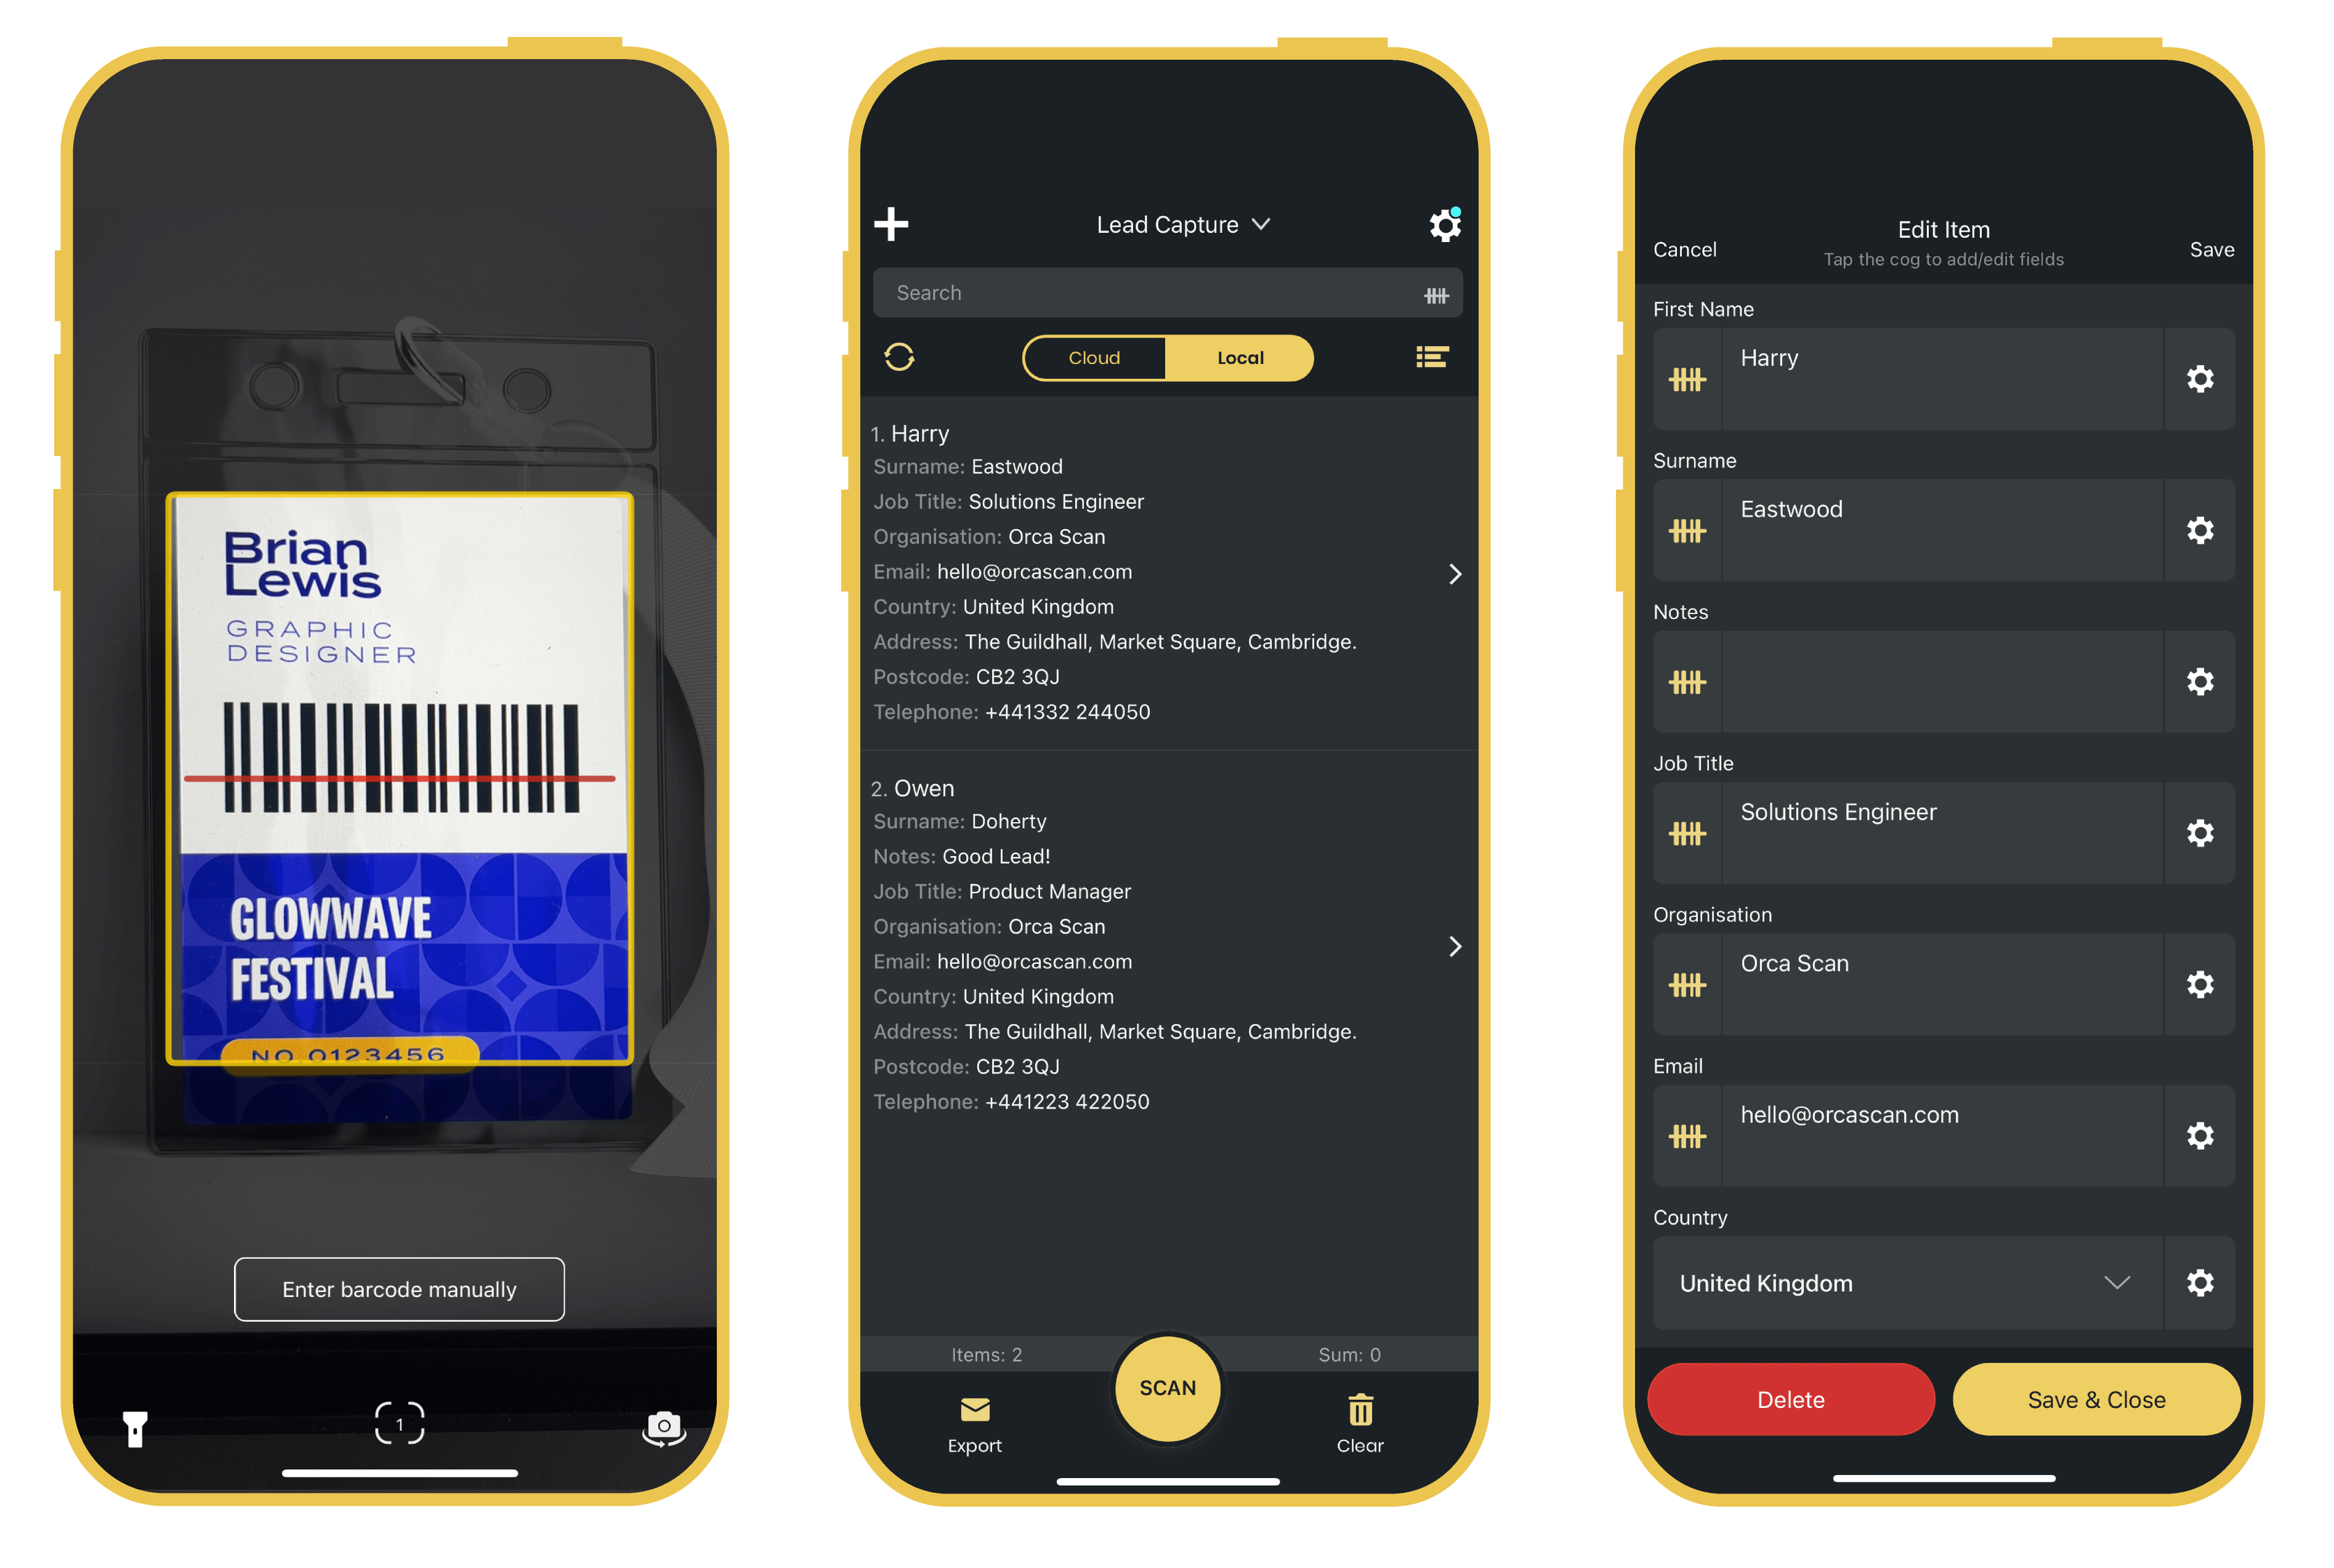 Screenshots of the Orca Scan mobile app capturing leads at trade shows